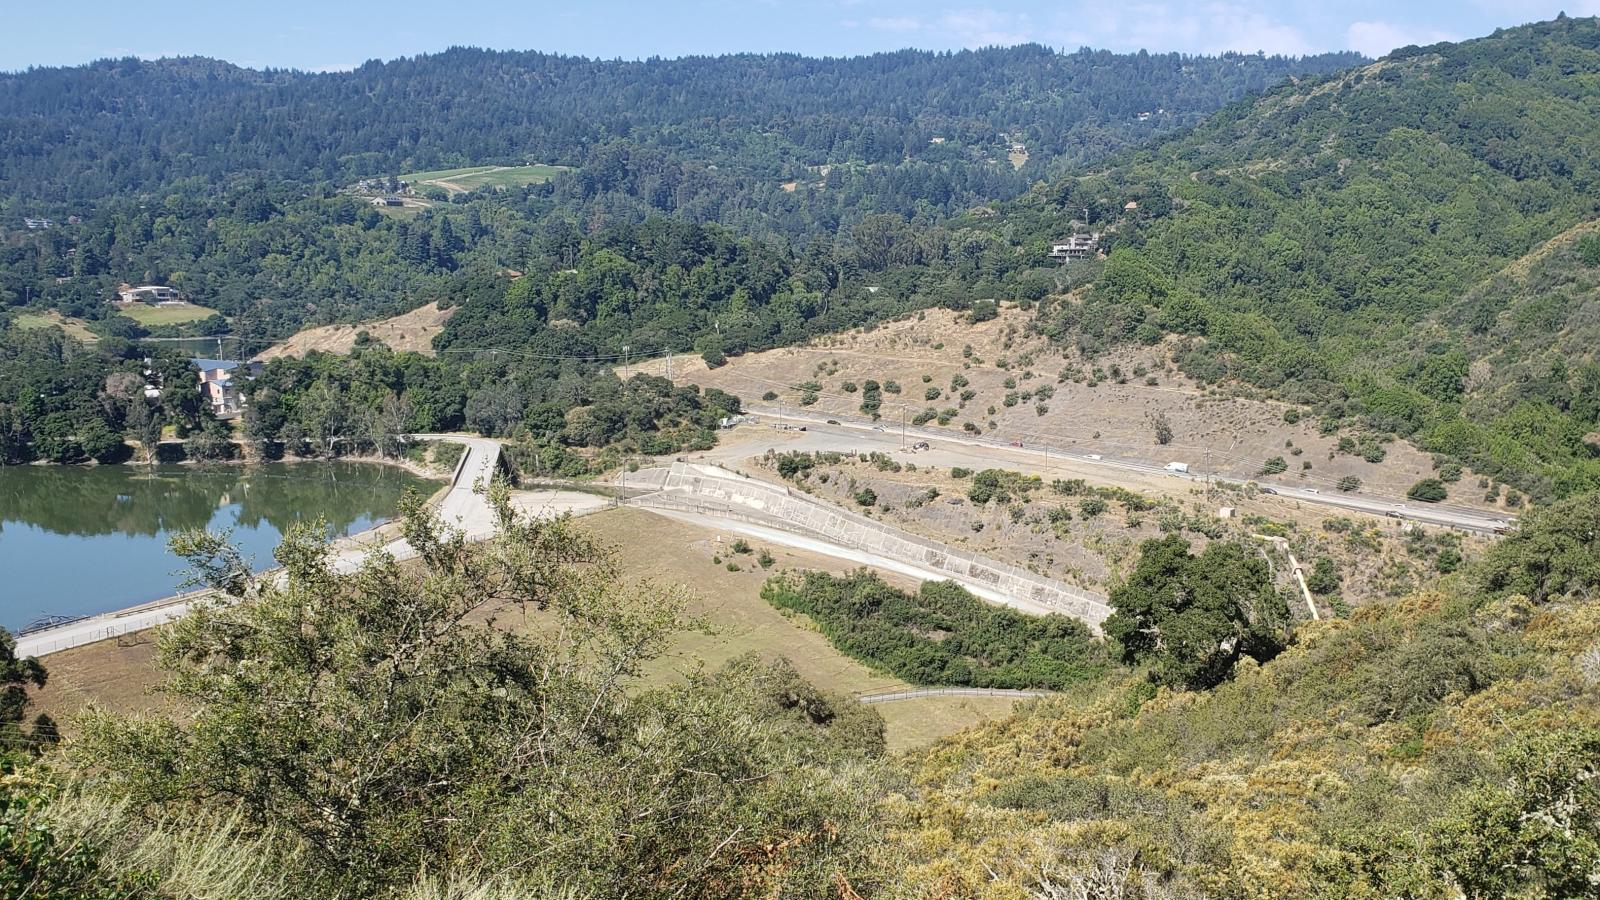 View from St. Joseph's Hill Preserve of highway and dam infrastructure that limits human and wildlife movement / photo by Aaron Peth